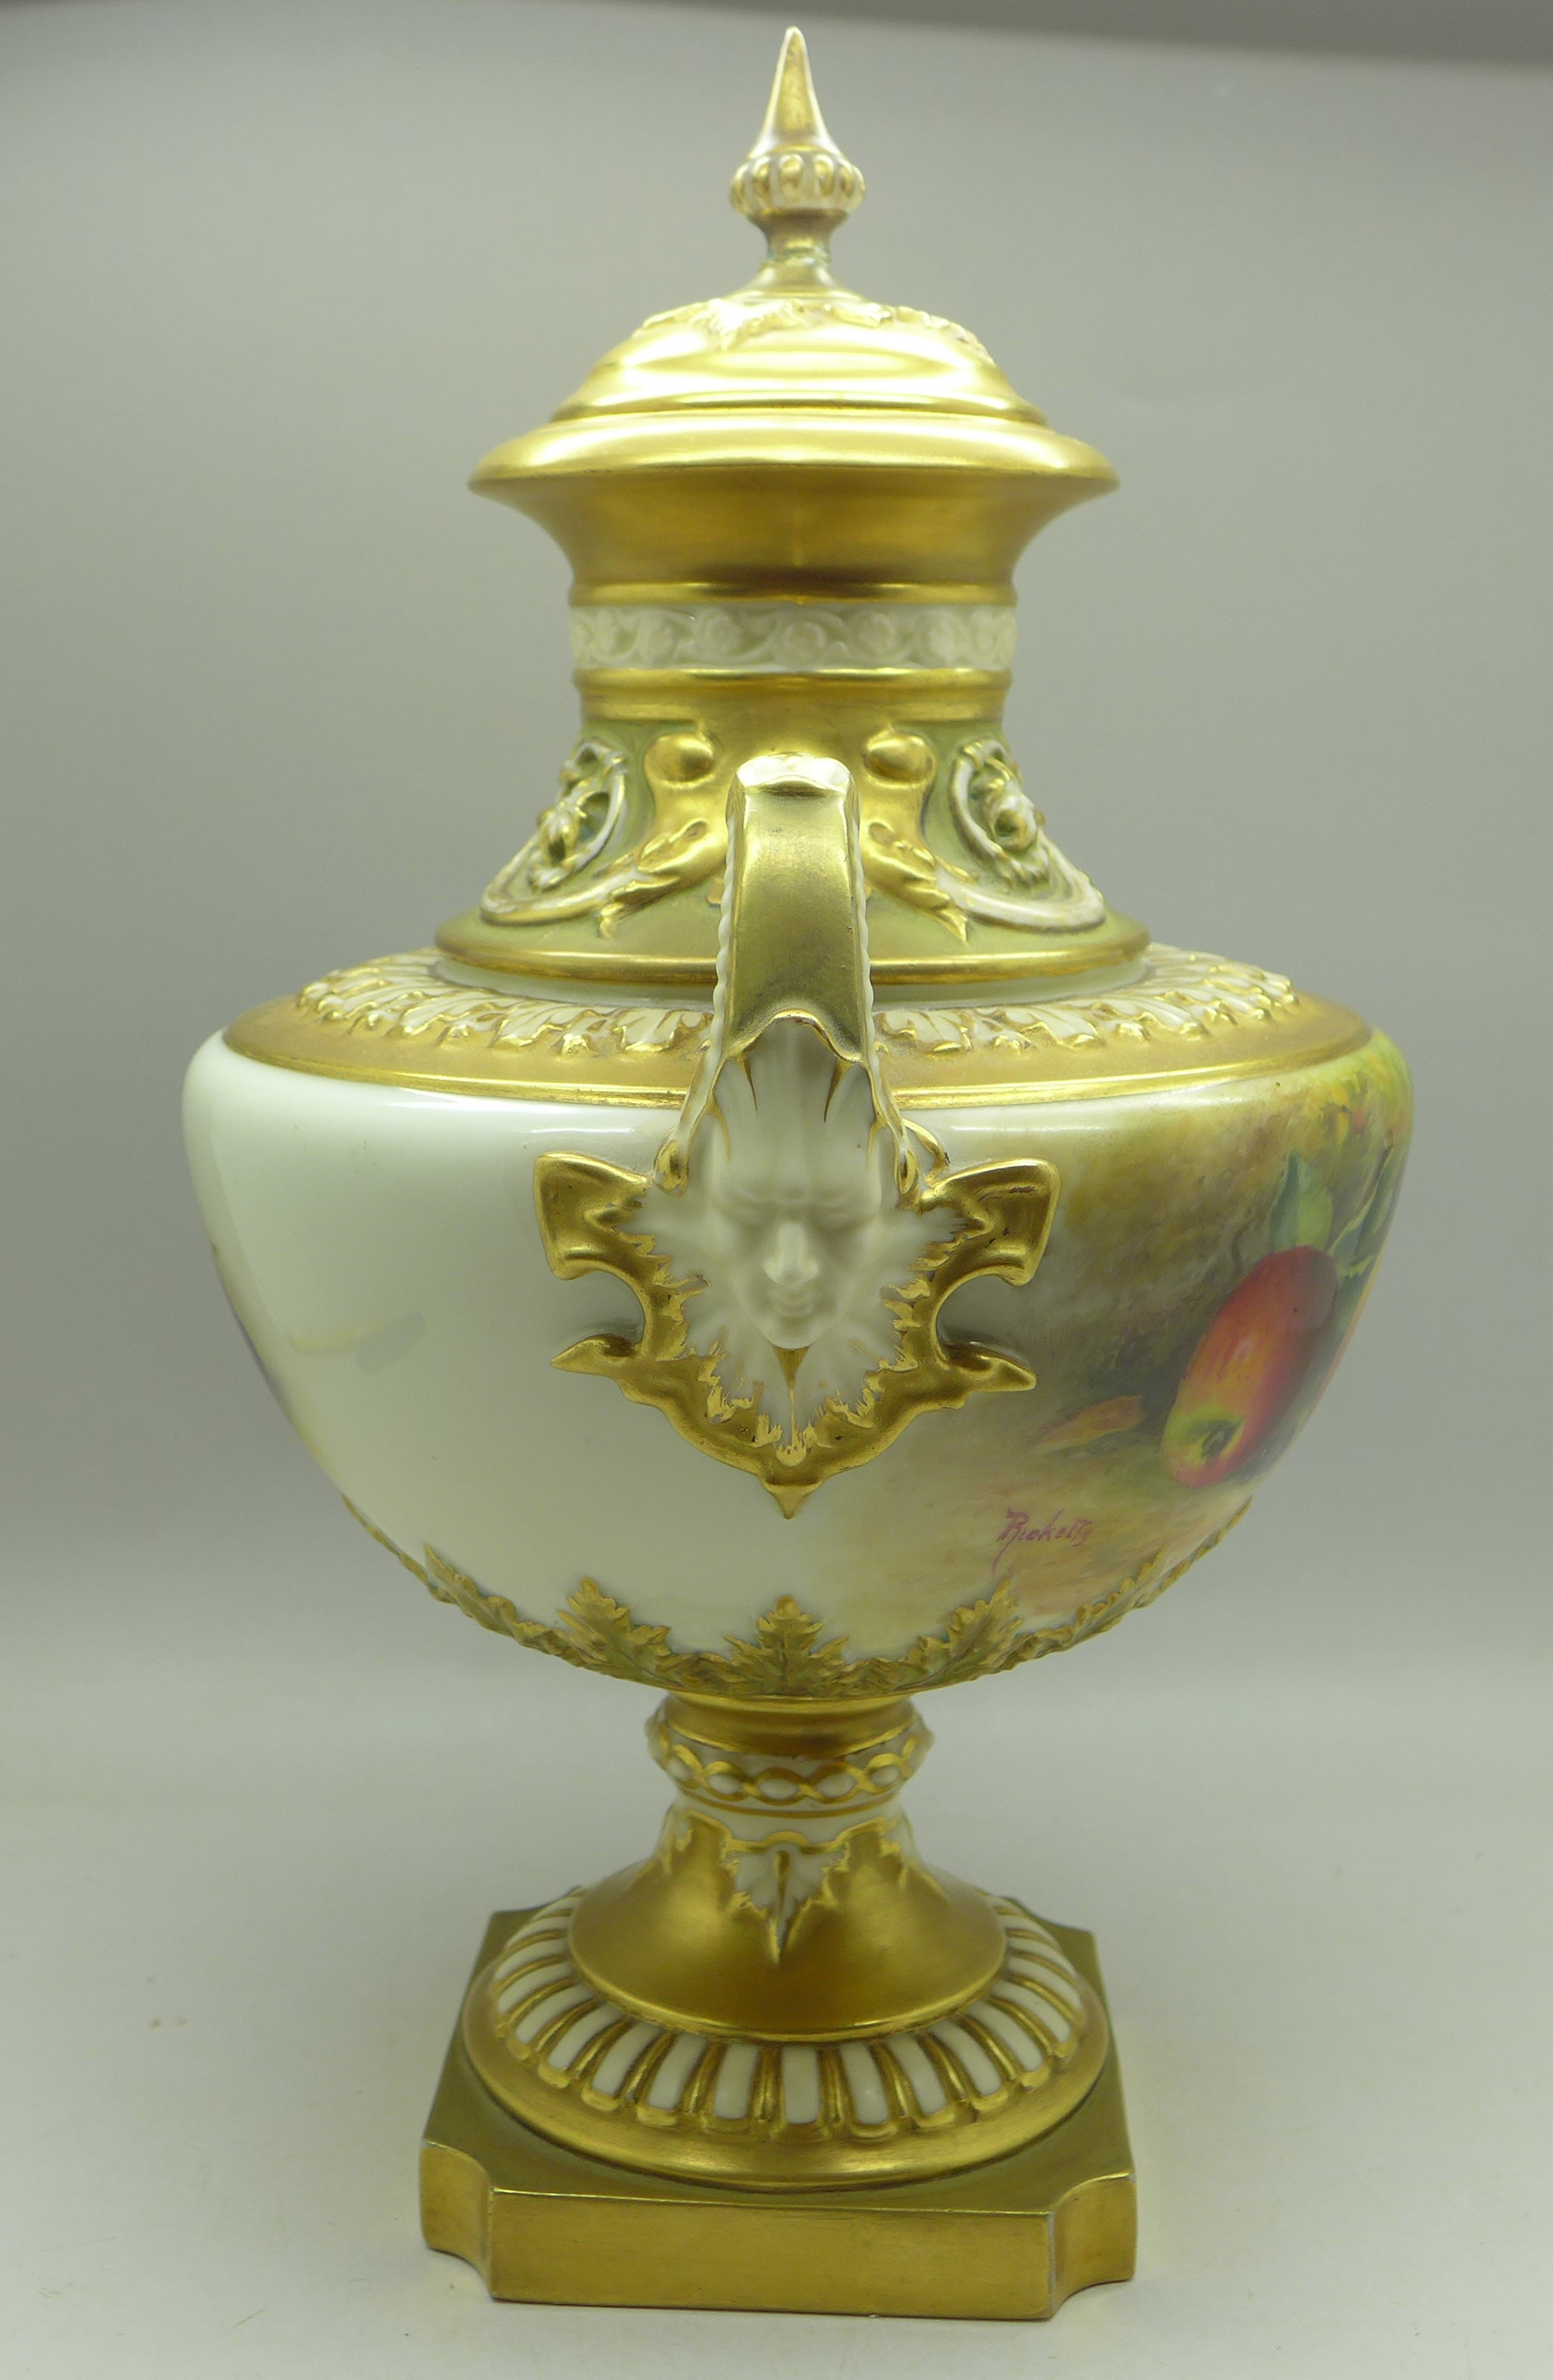 A 1925 Royal Worcester hand decorated lidded vase, 1572, signed (William) Ricketts, finial on lid - Image 6 of 11